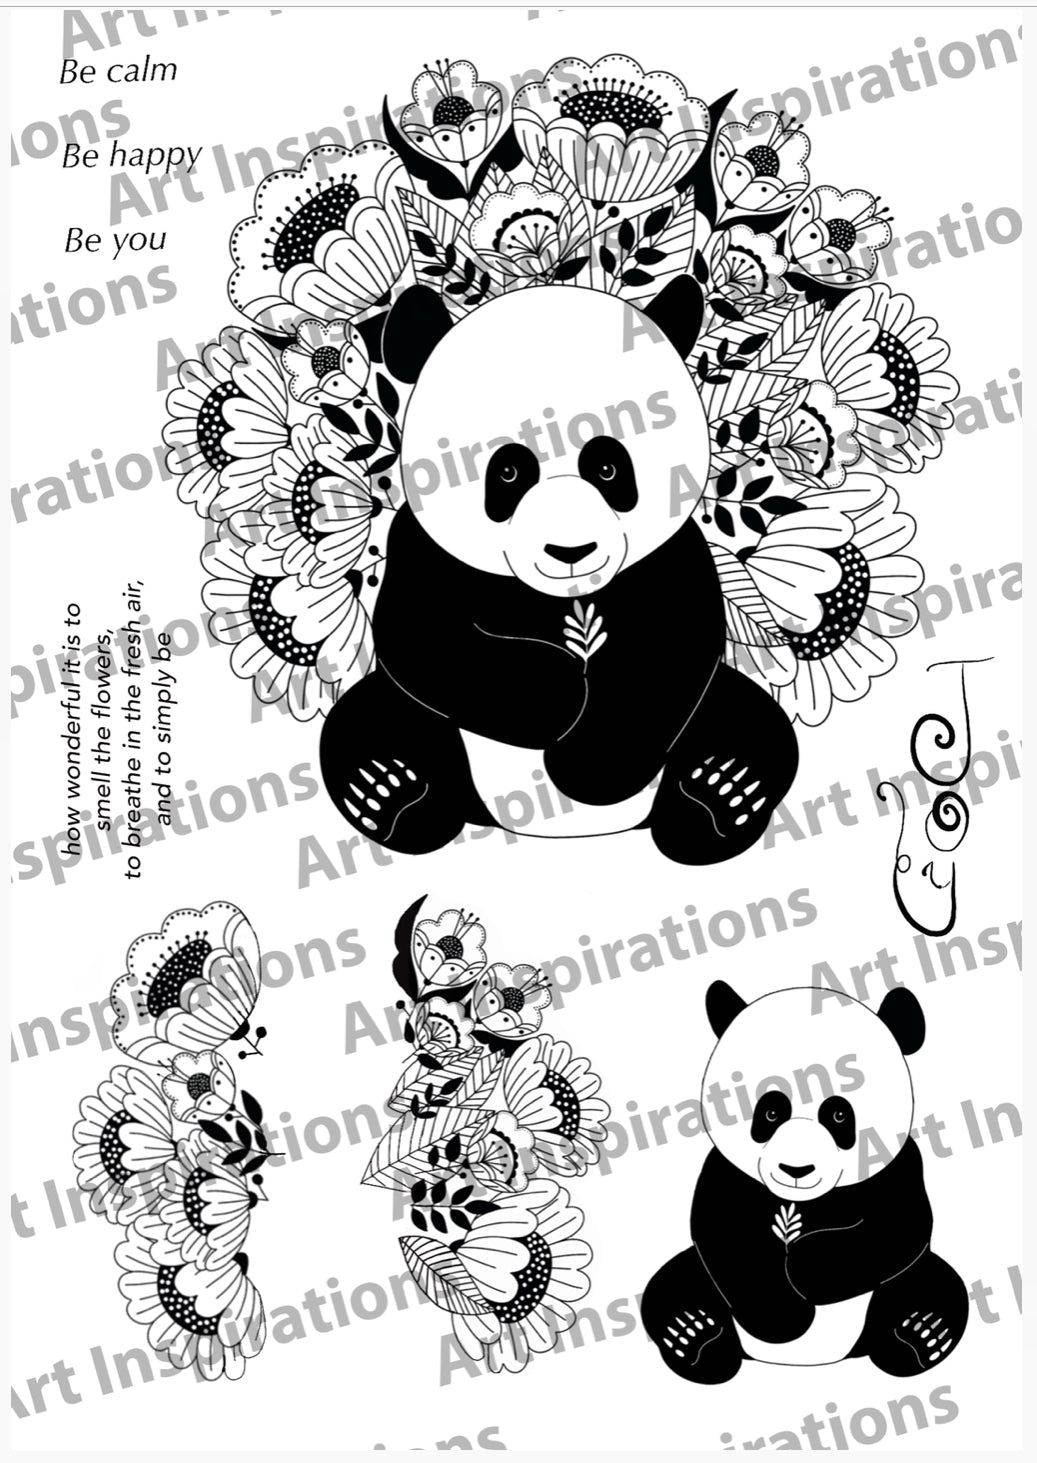 Art Inspirations by Wensdi Made A5 Clear Stamp Sheet - Floral Panda - 9 Stamps